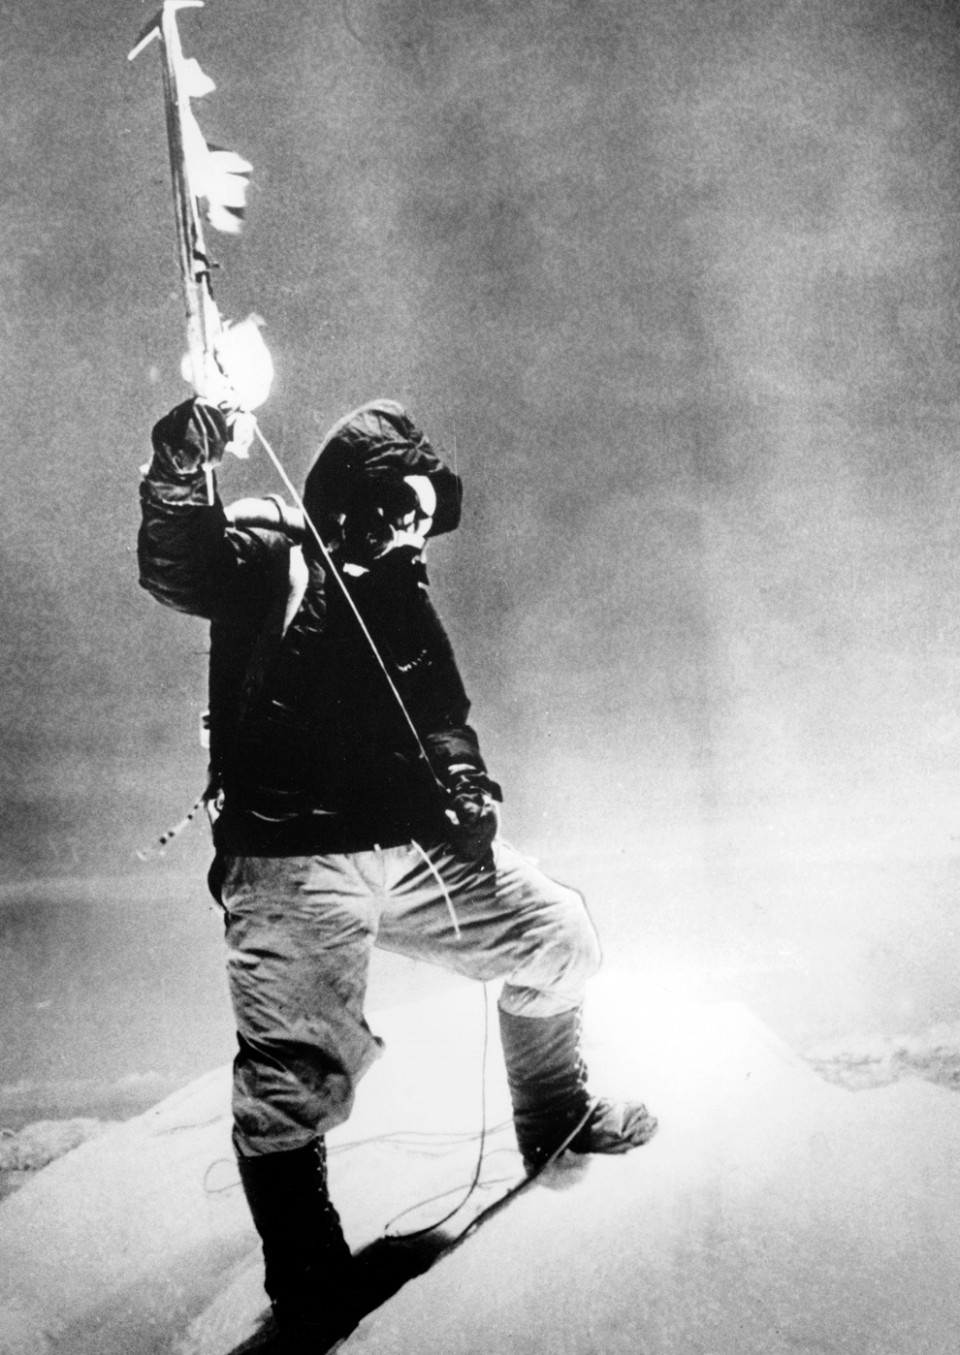 Sherpa-Tenzing-Norgay-stands-on-the-summit-of-Mount-Everest-May-